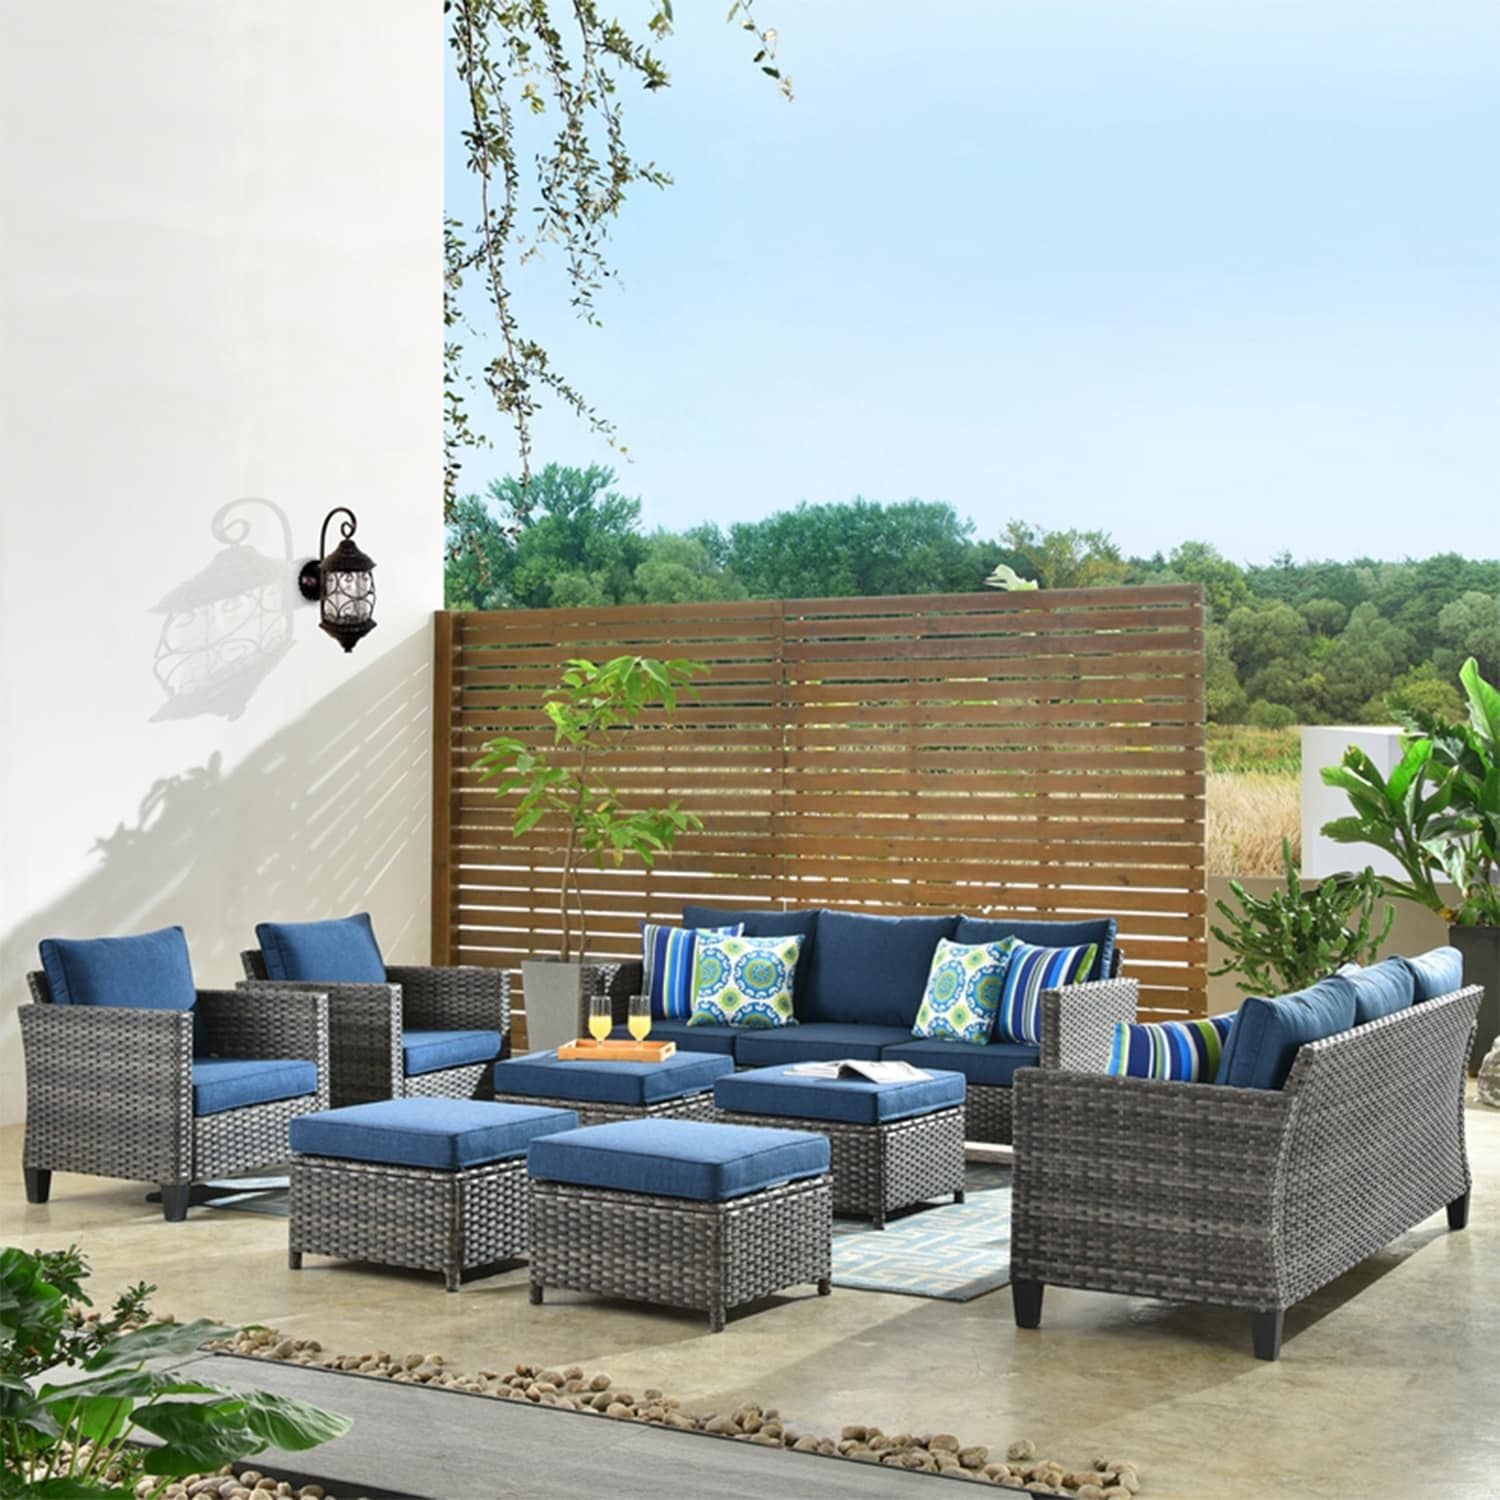 Ovios 8 Piece Patio Furniture Wicker Outdoor High Back Sectional Set – On  Sale – – 32989218 Intended For 8 Pcs Outdoor Patio Furniture Set (View 4 of 15)